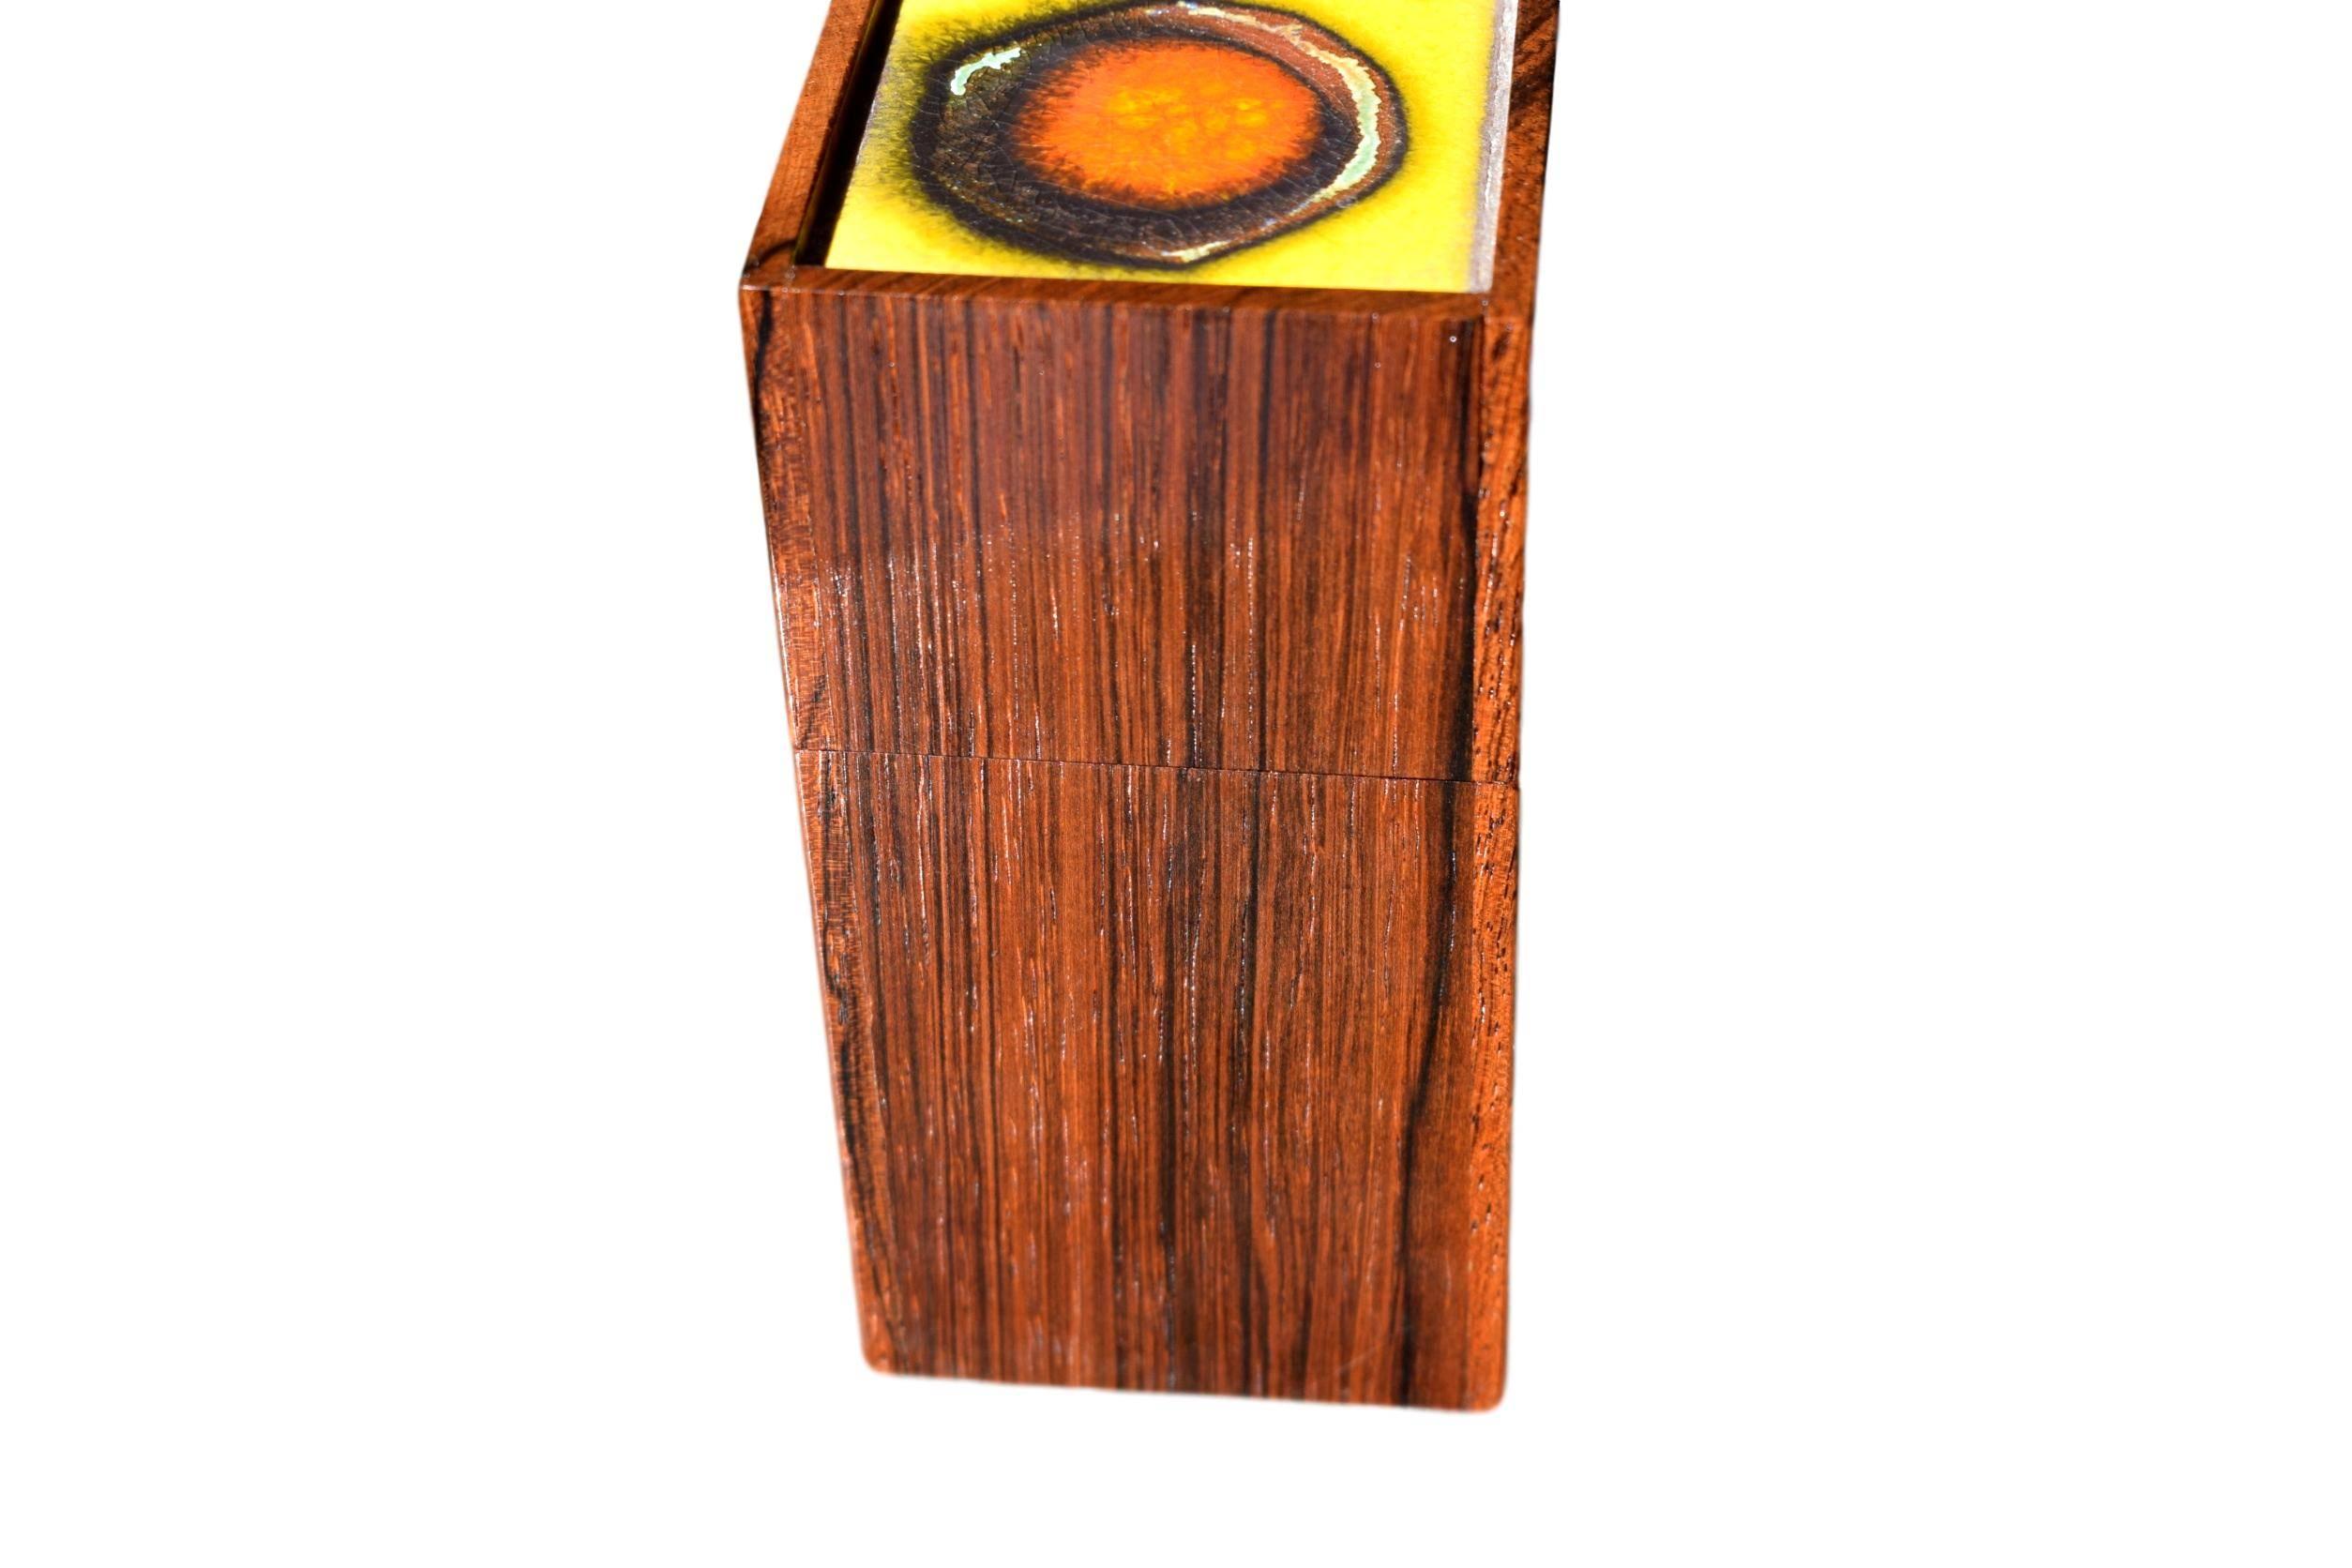 A unique Danish midcentury rosewood box by Alfred Klitgaard with decorative enamel by Danish artist Bodil Eje.

Stamped 